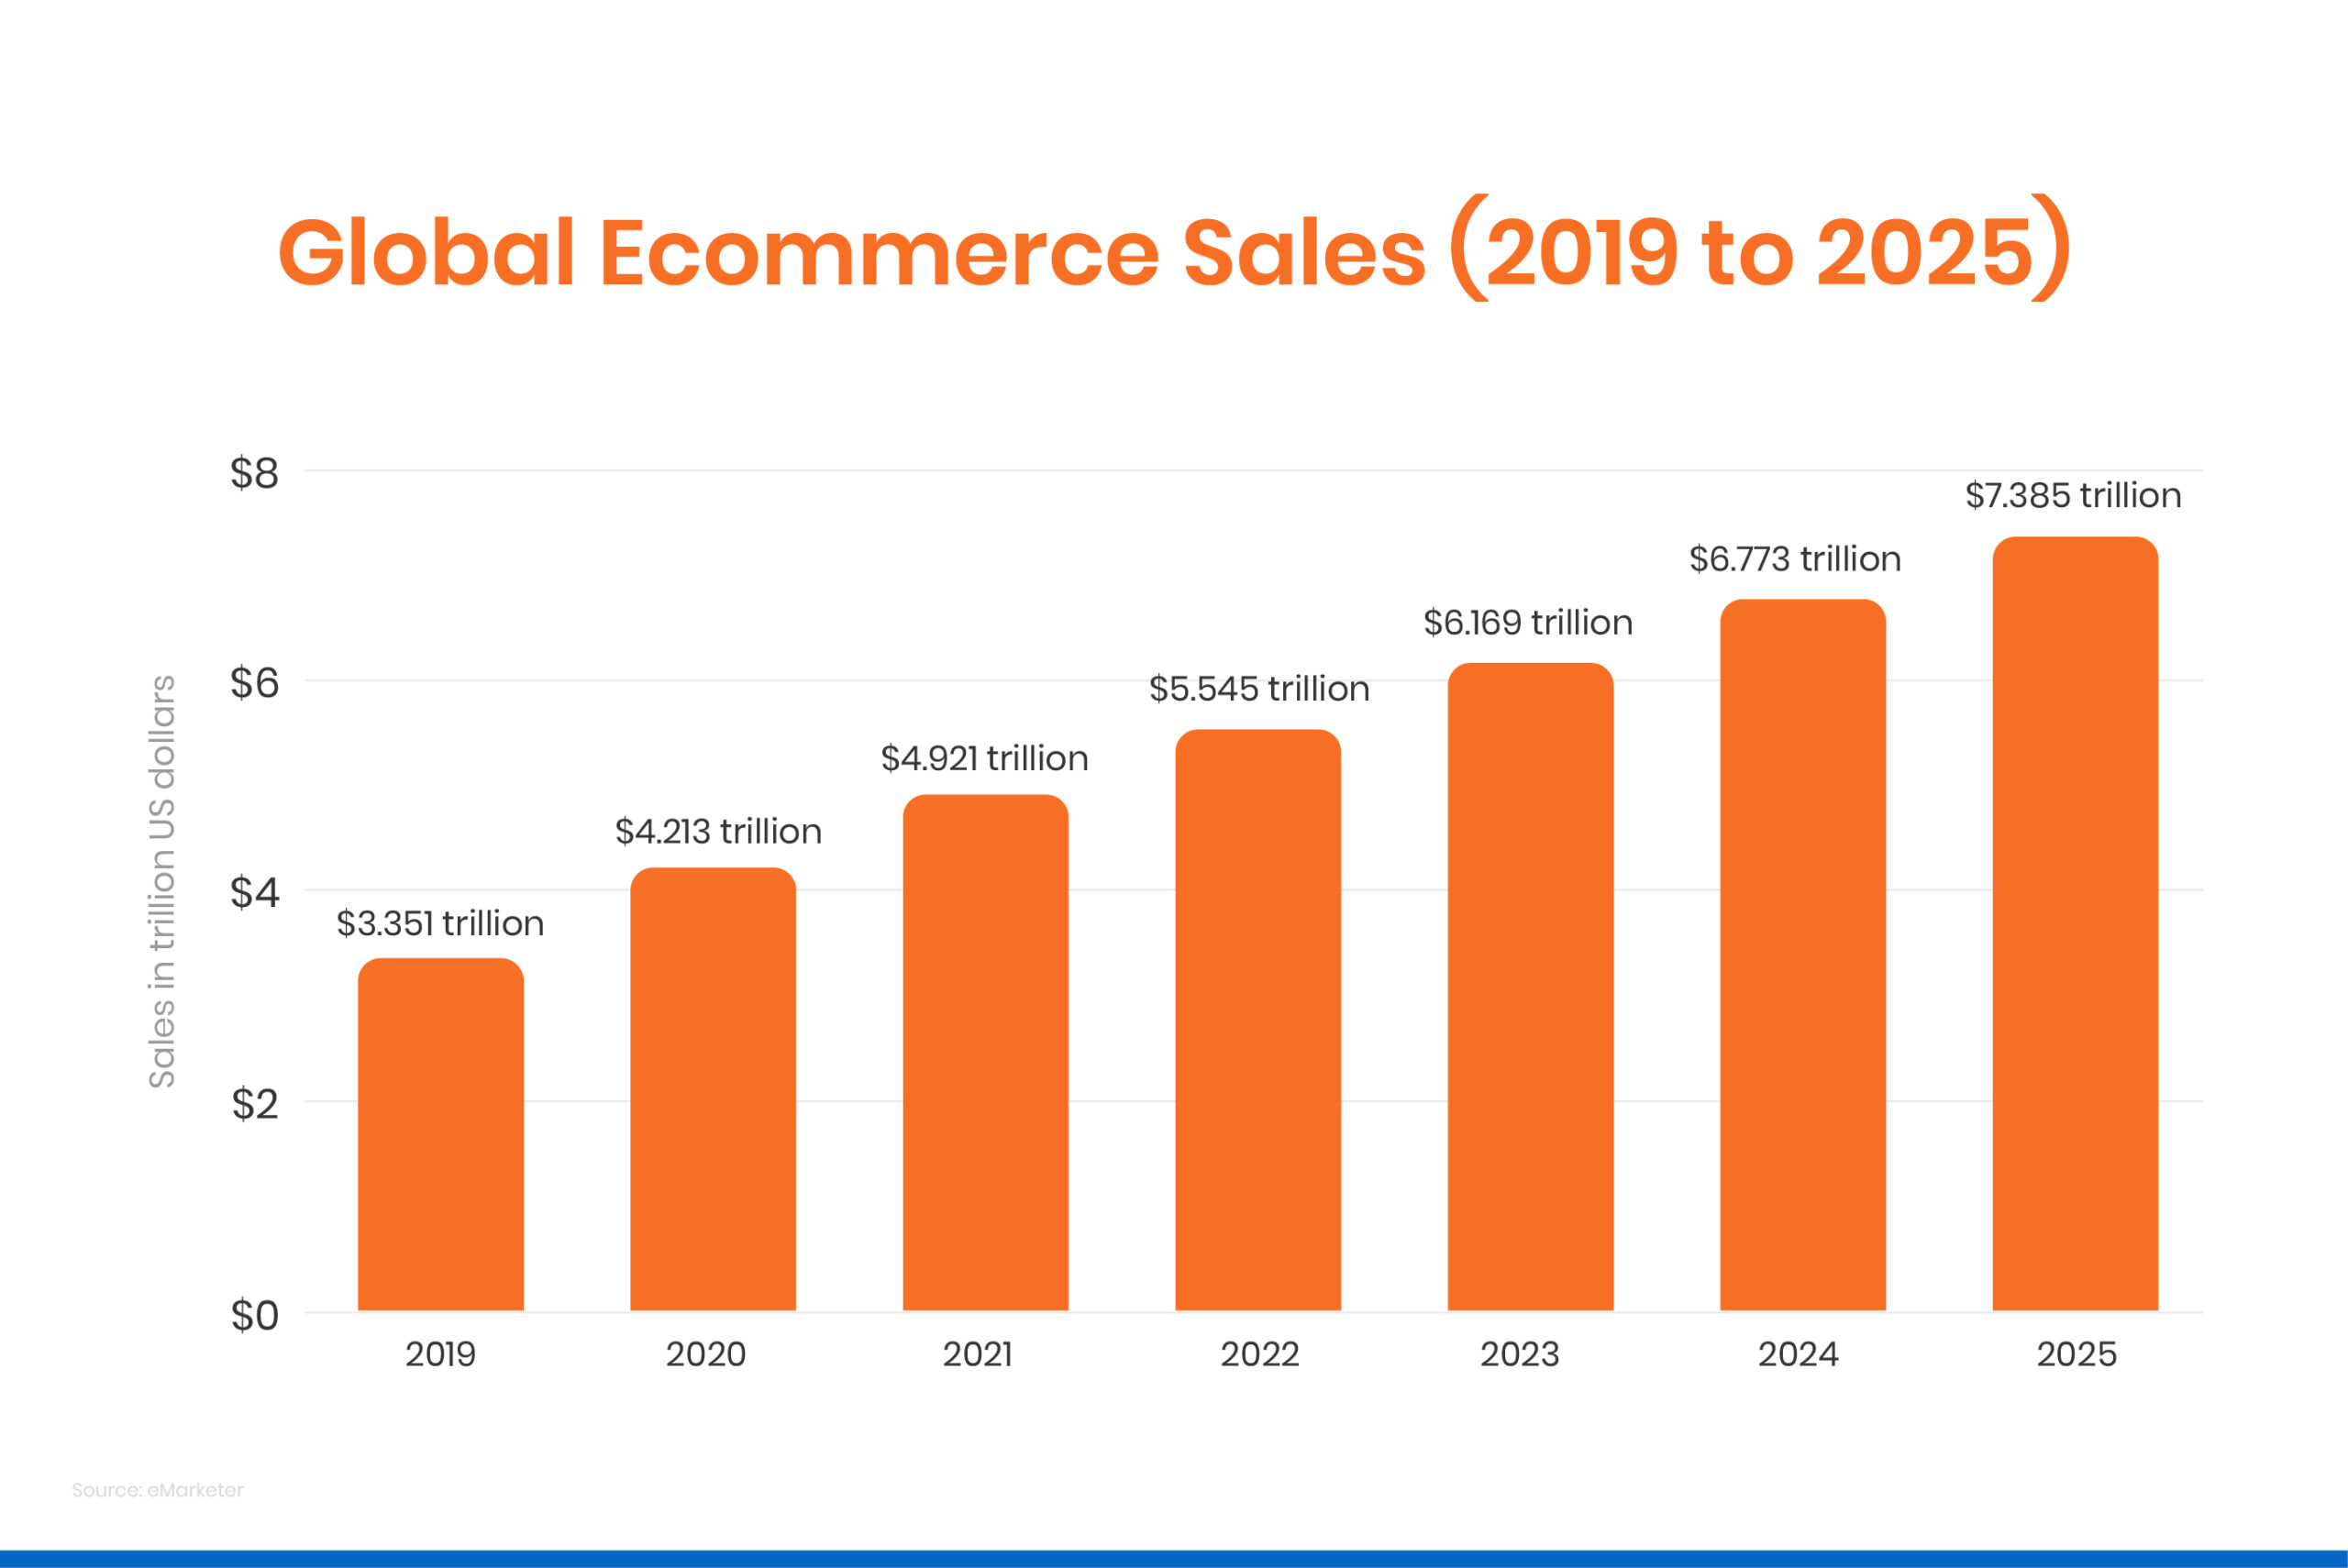 E-commerce Sales Worldwide from 2019 to 2025